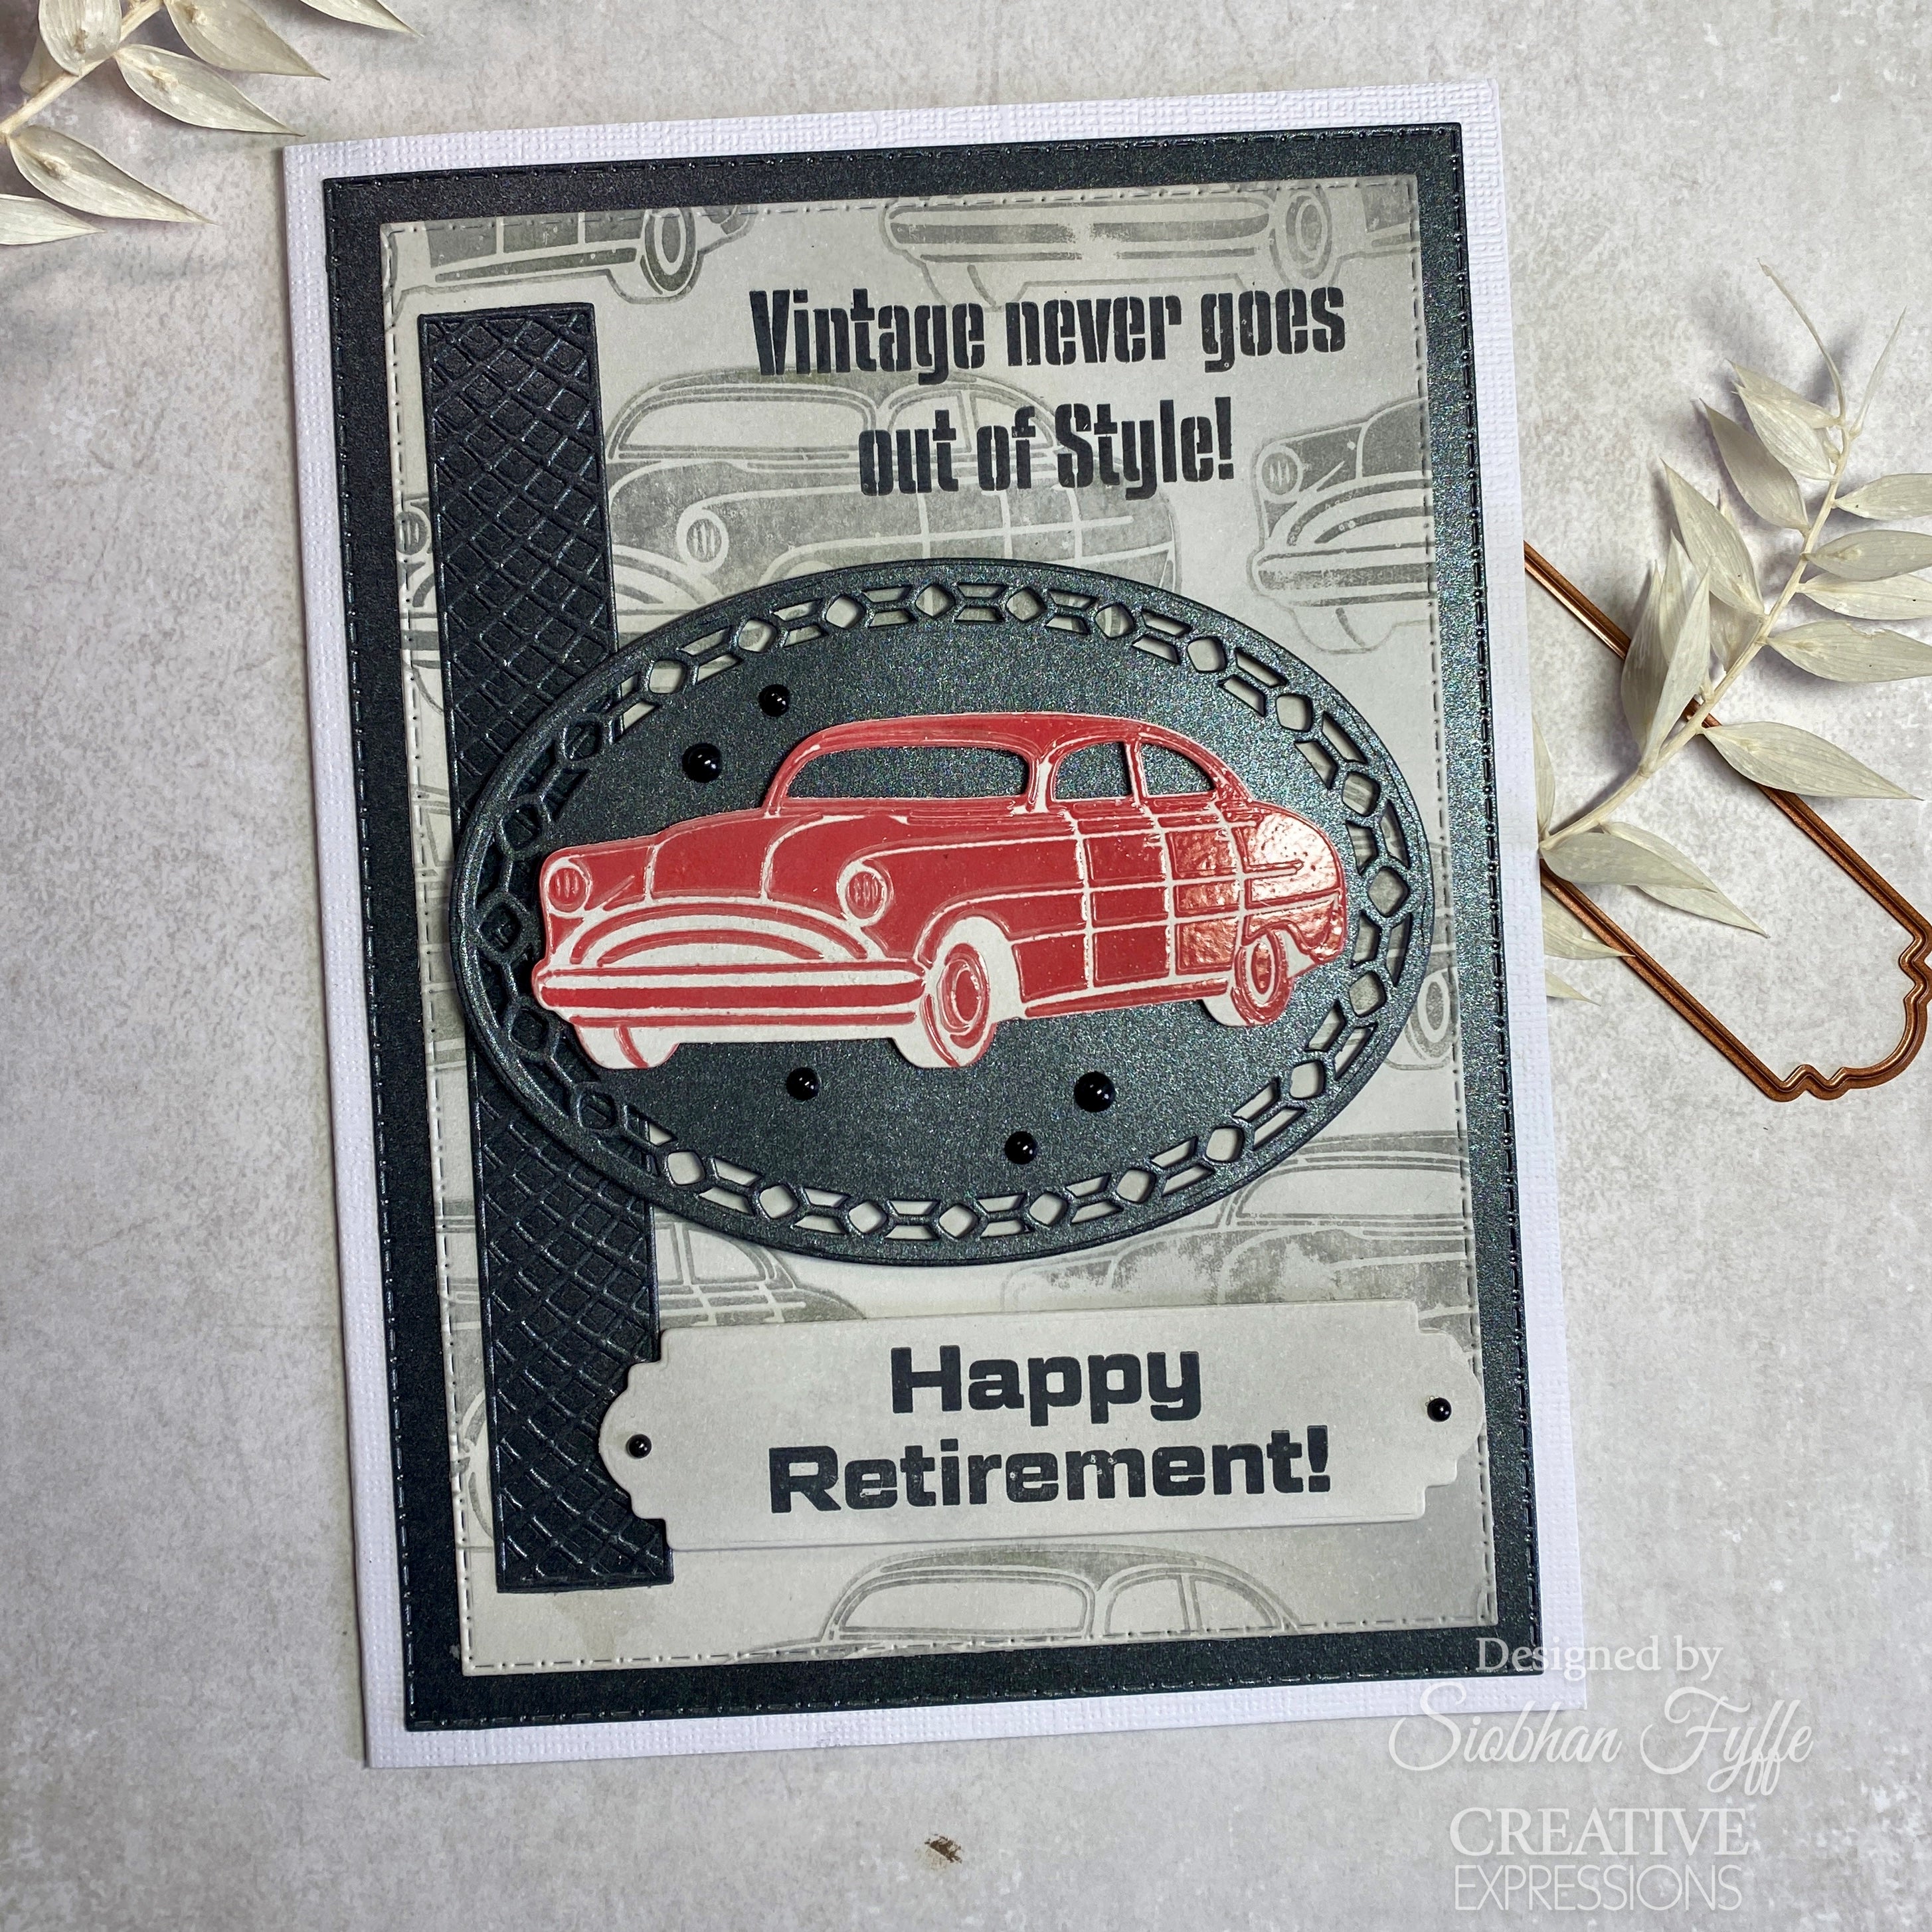 Creative Expressions Sue Wilson Dream Car Collection Vintage Cars Craft Die